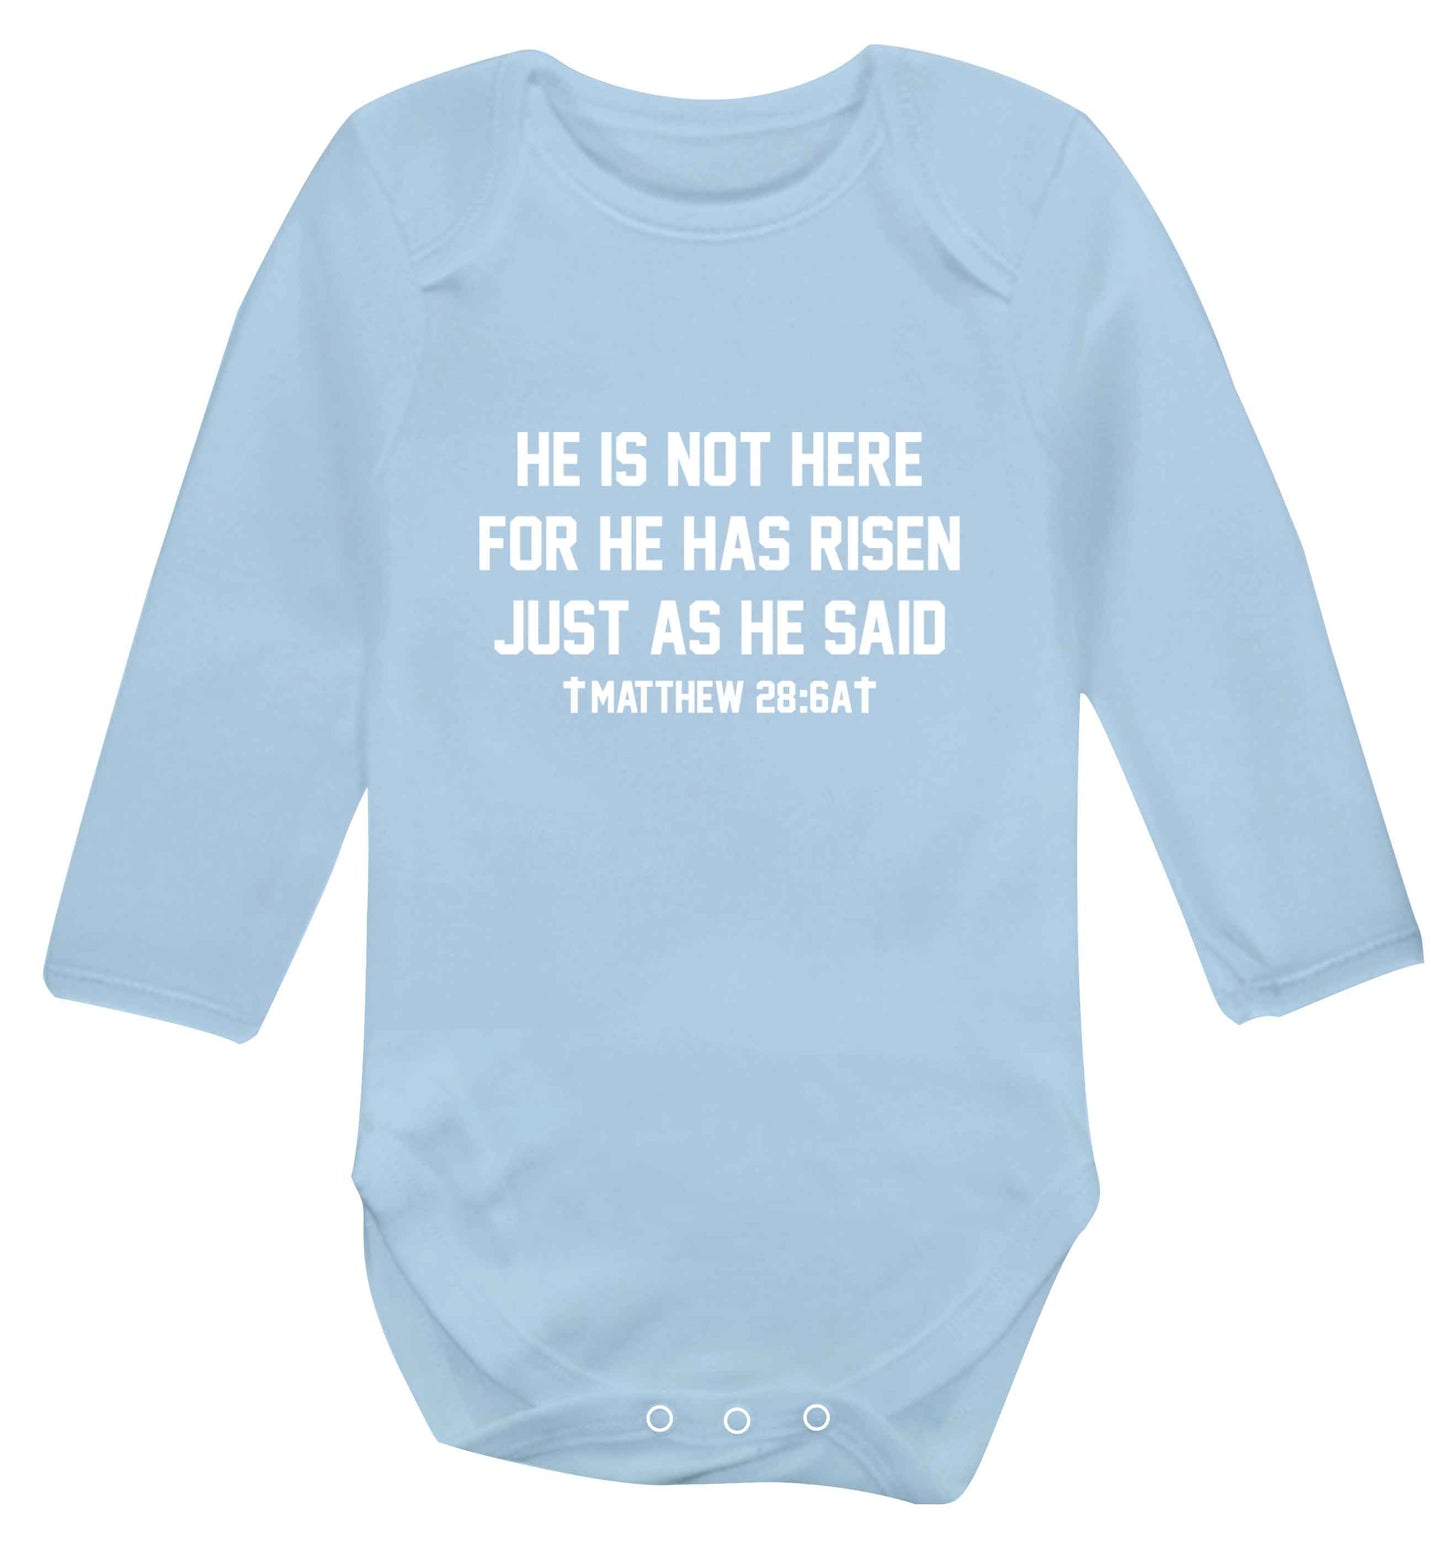 He is not here for he has risen just as he said matthew 28:6A baby vest long sleeved pale blue 6-12 months